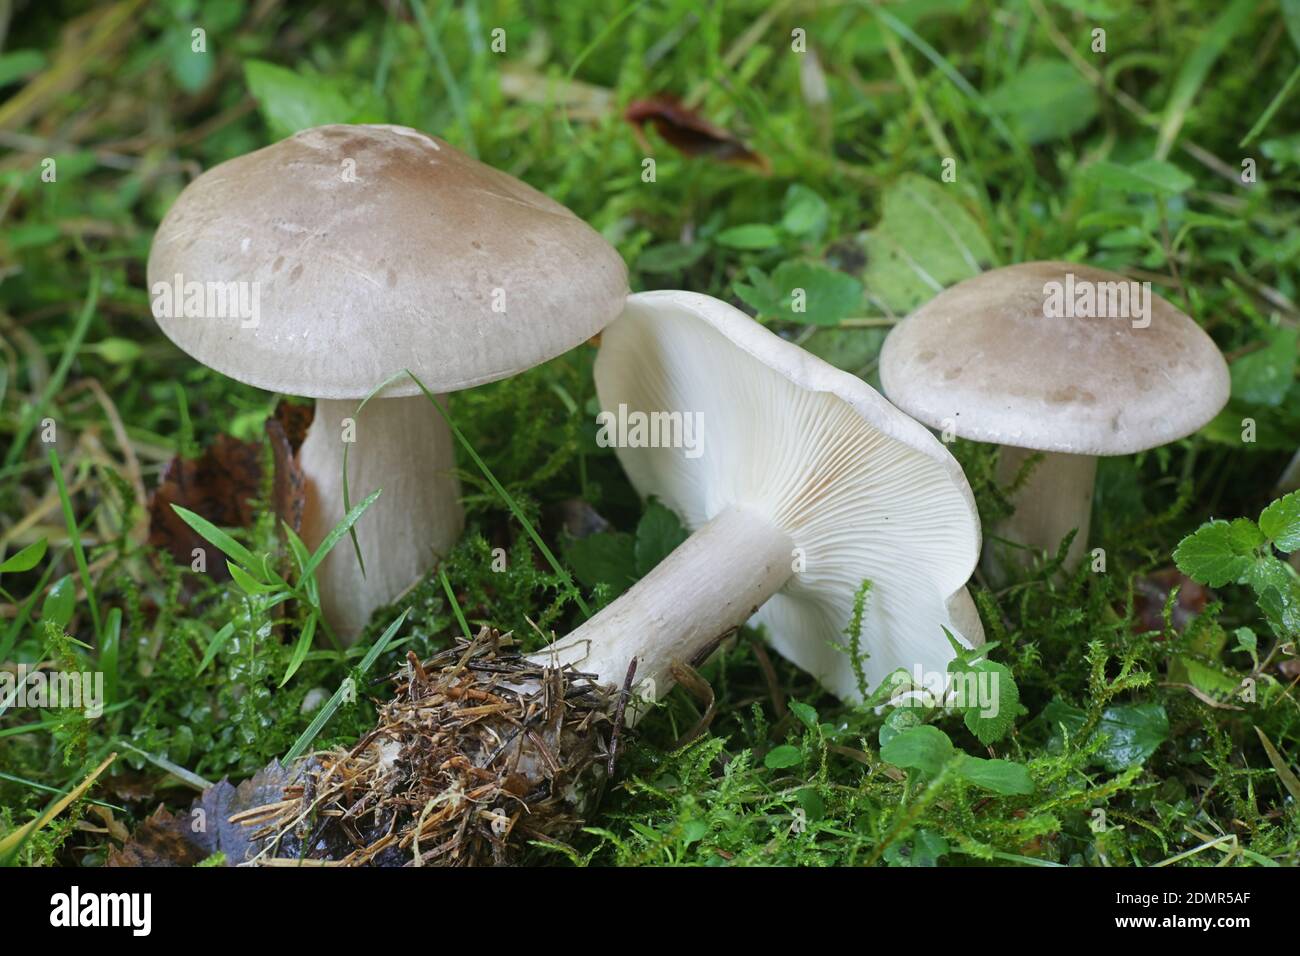 Clitocybe nebularis, known as the clouded agaric or cloud funnel, wild edible mushrooms from Finland Stock Photo